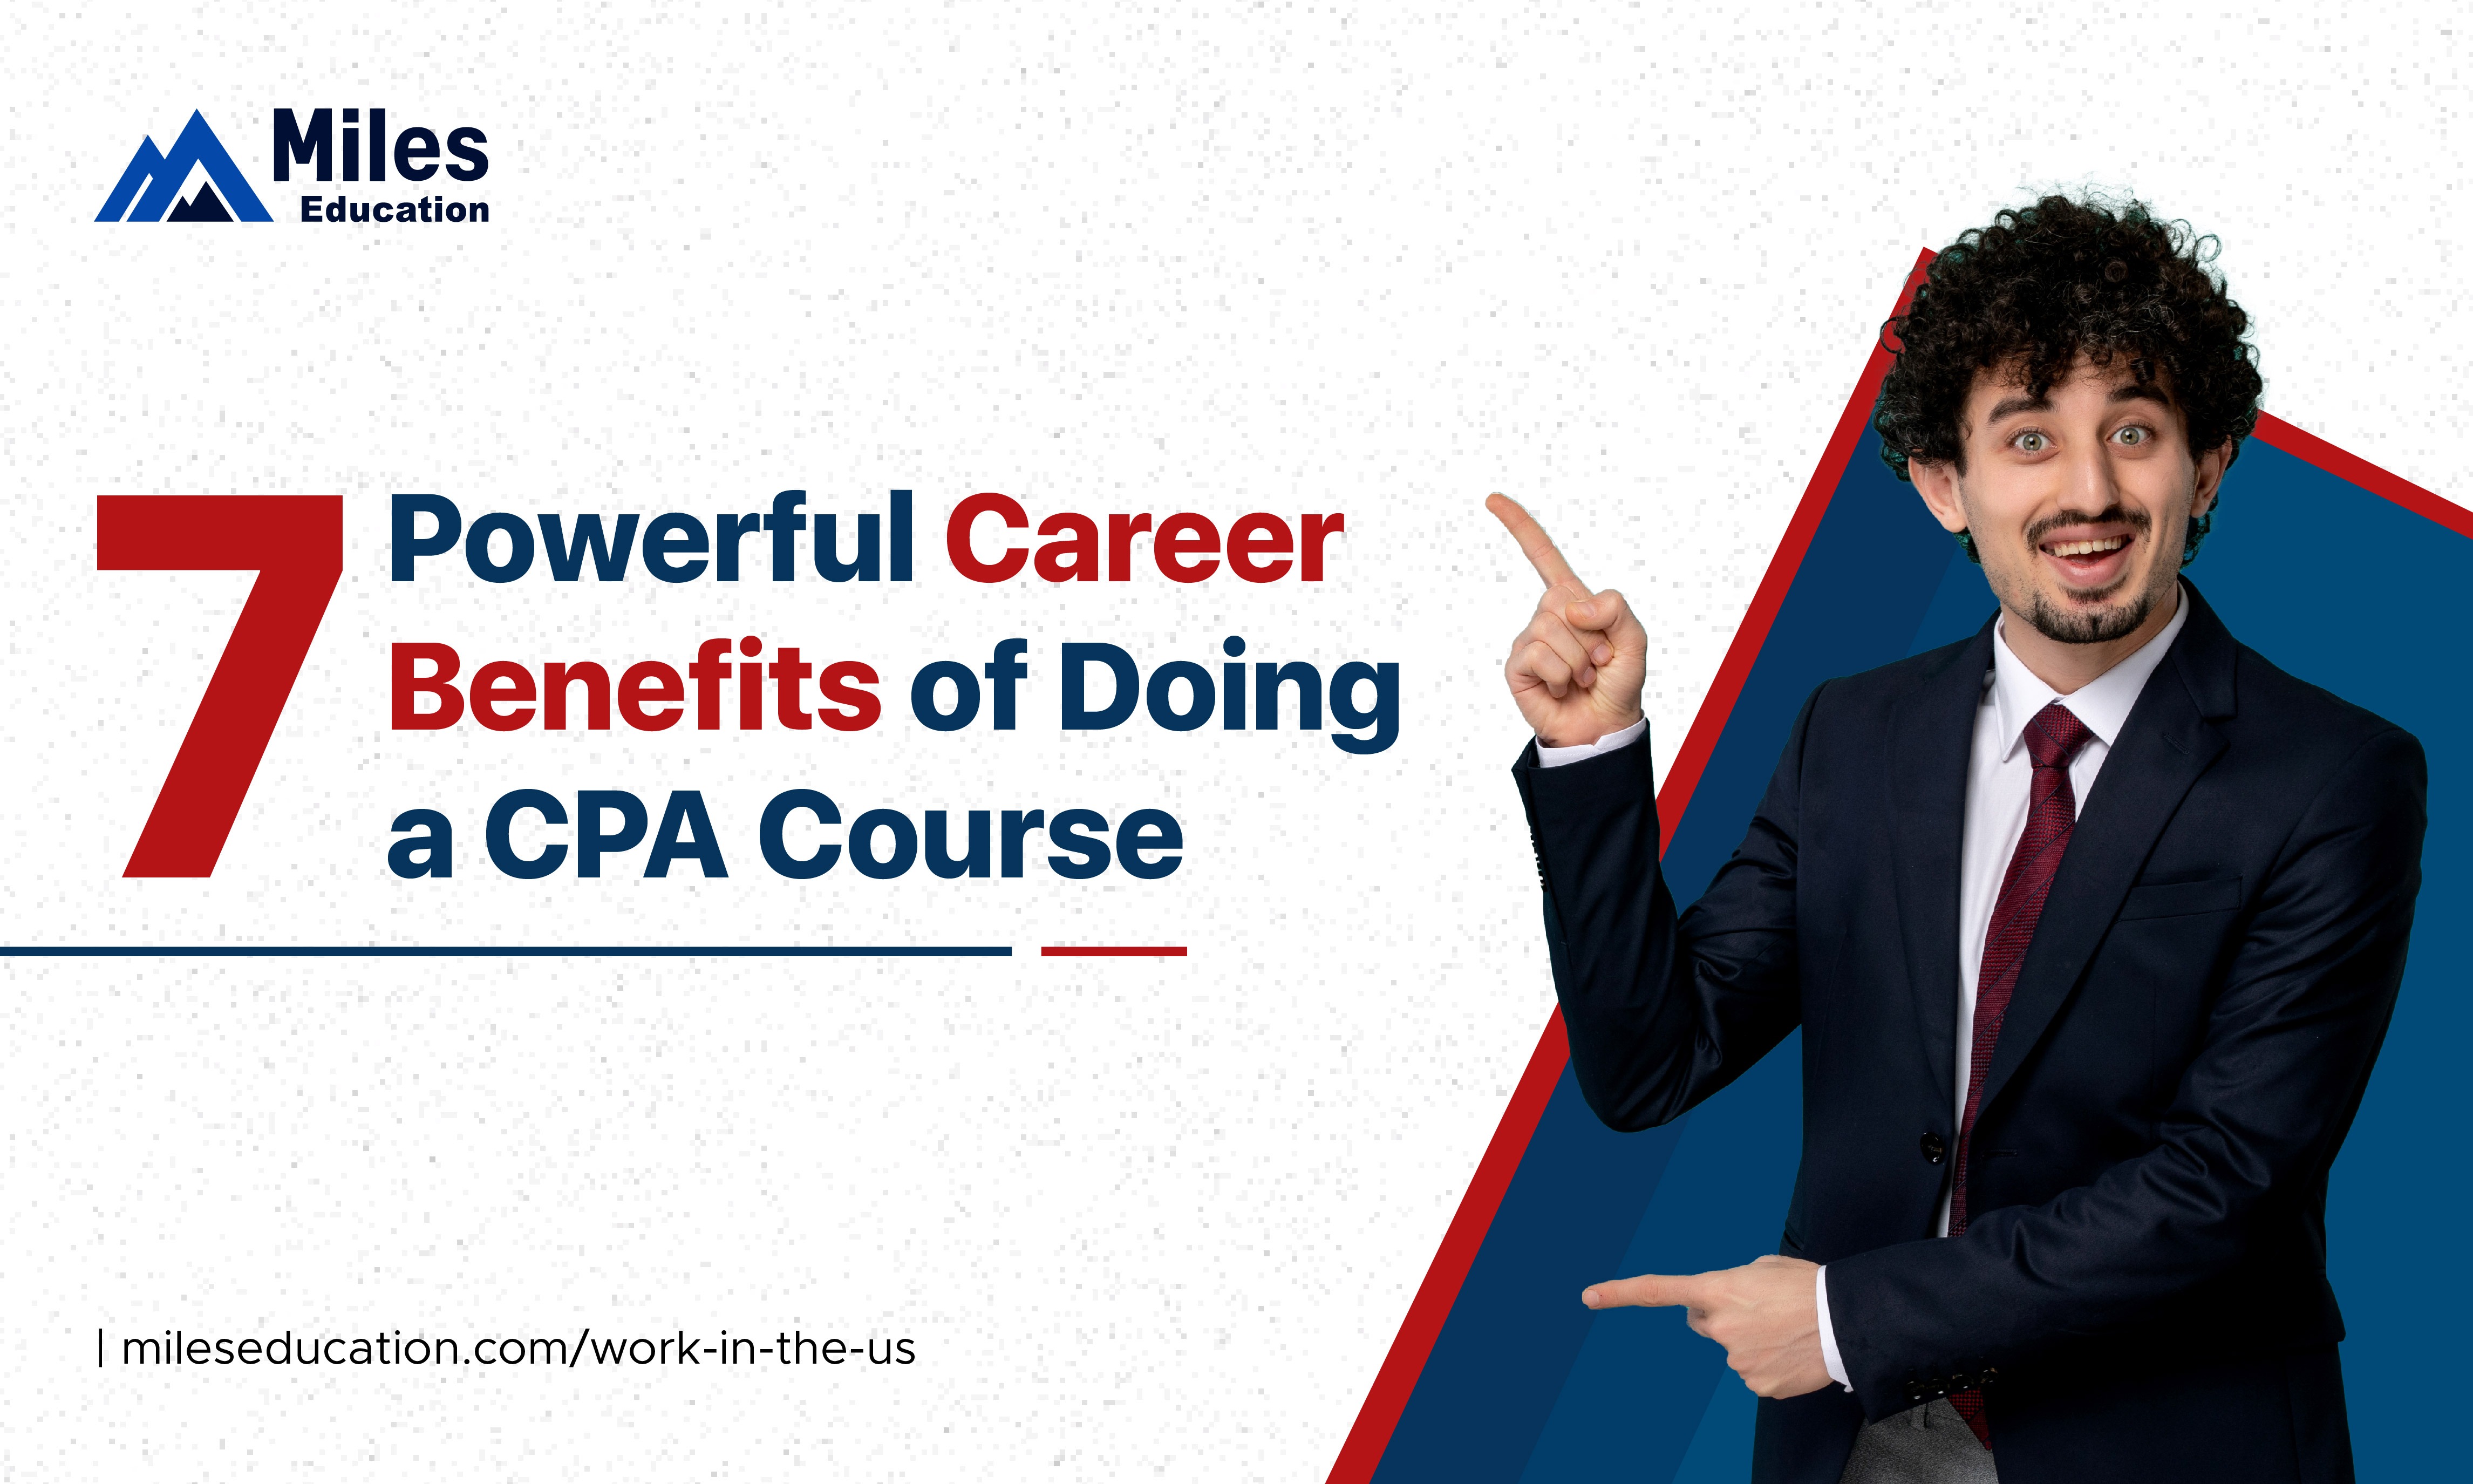 7 Powerful Career Benefits of Doing a CPA Course